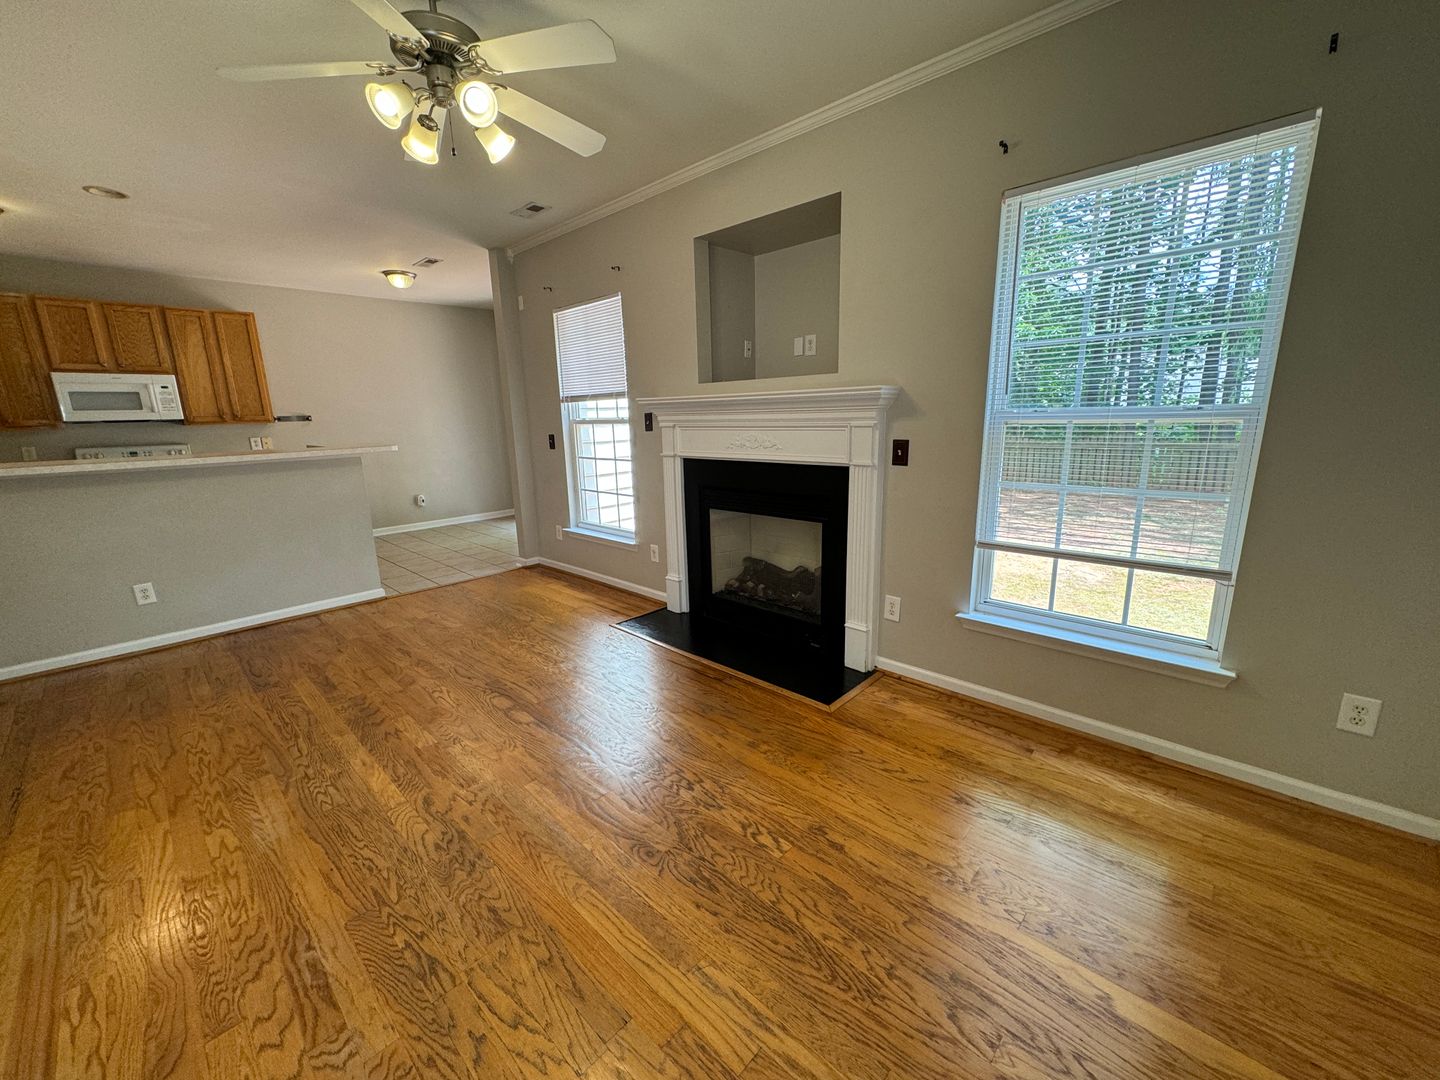 3 Bed | 2.5 Bath Home in Raleigh with Large Fenced Yard!